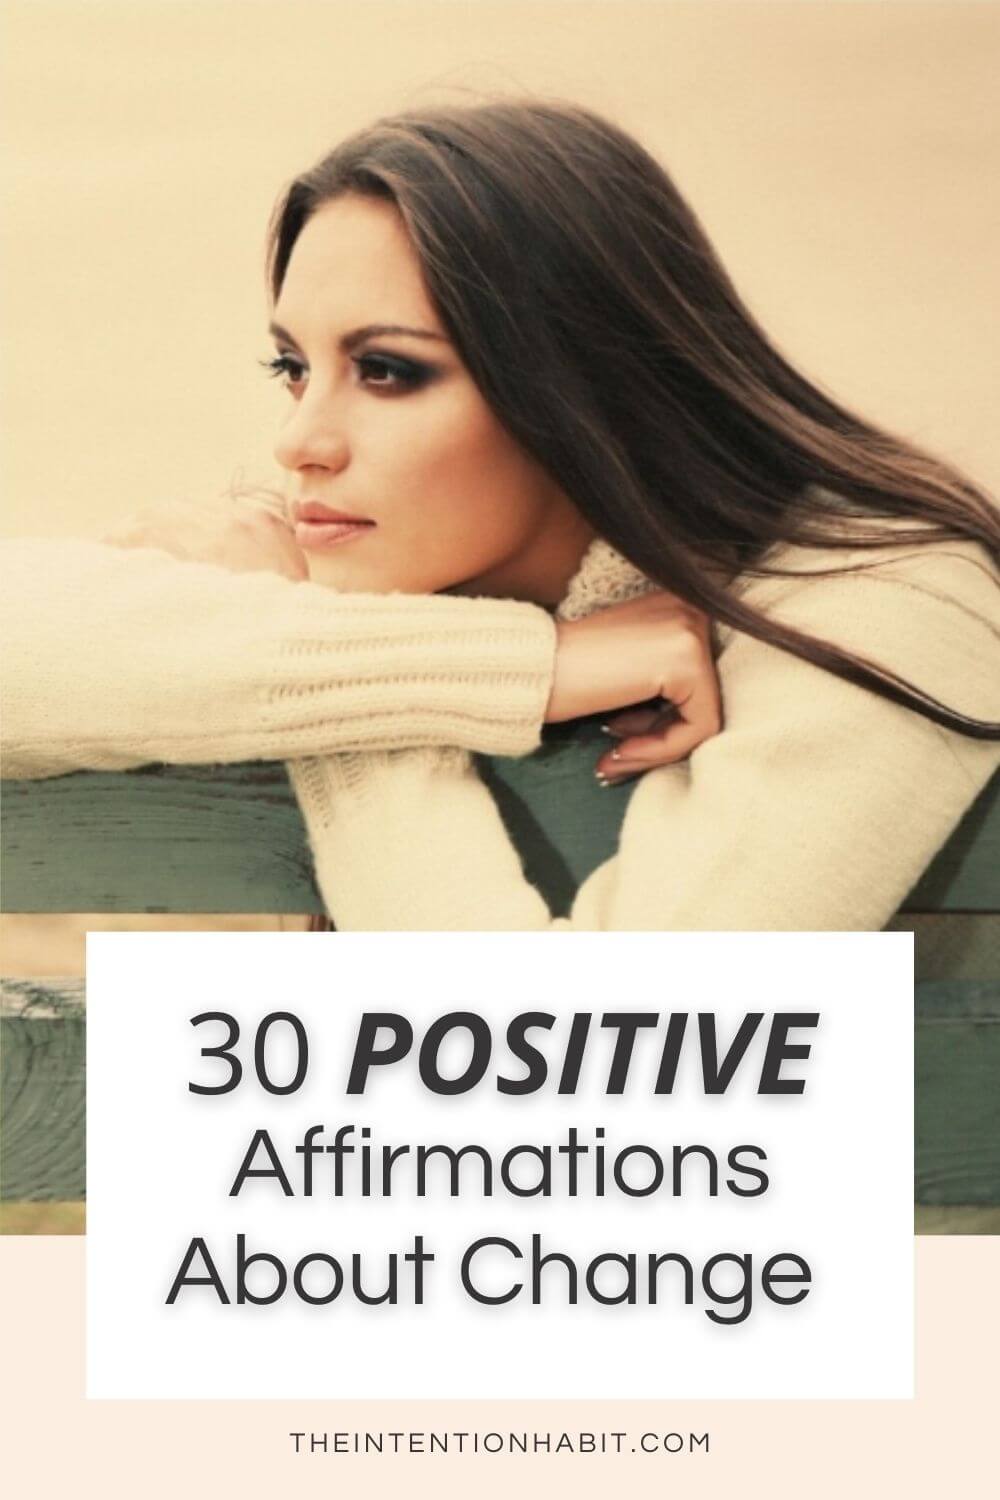 30 positive affirmations about change.